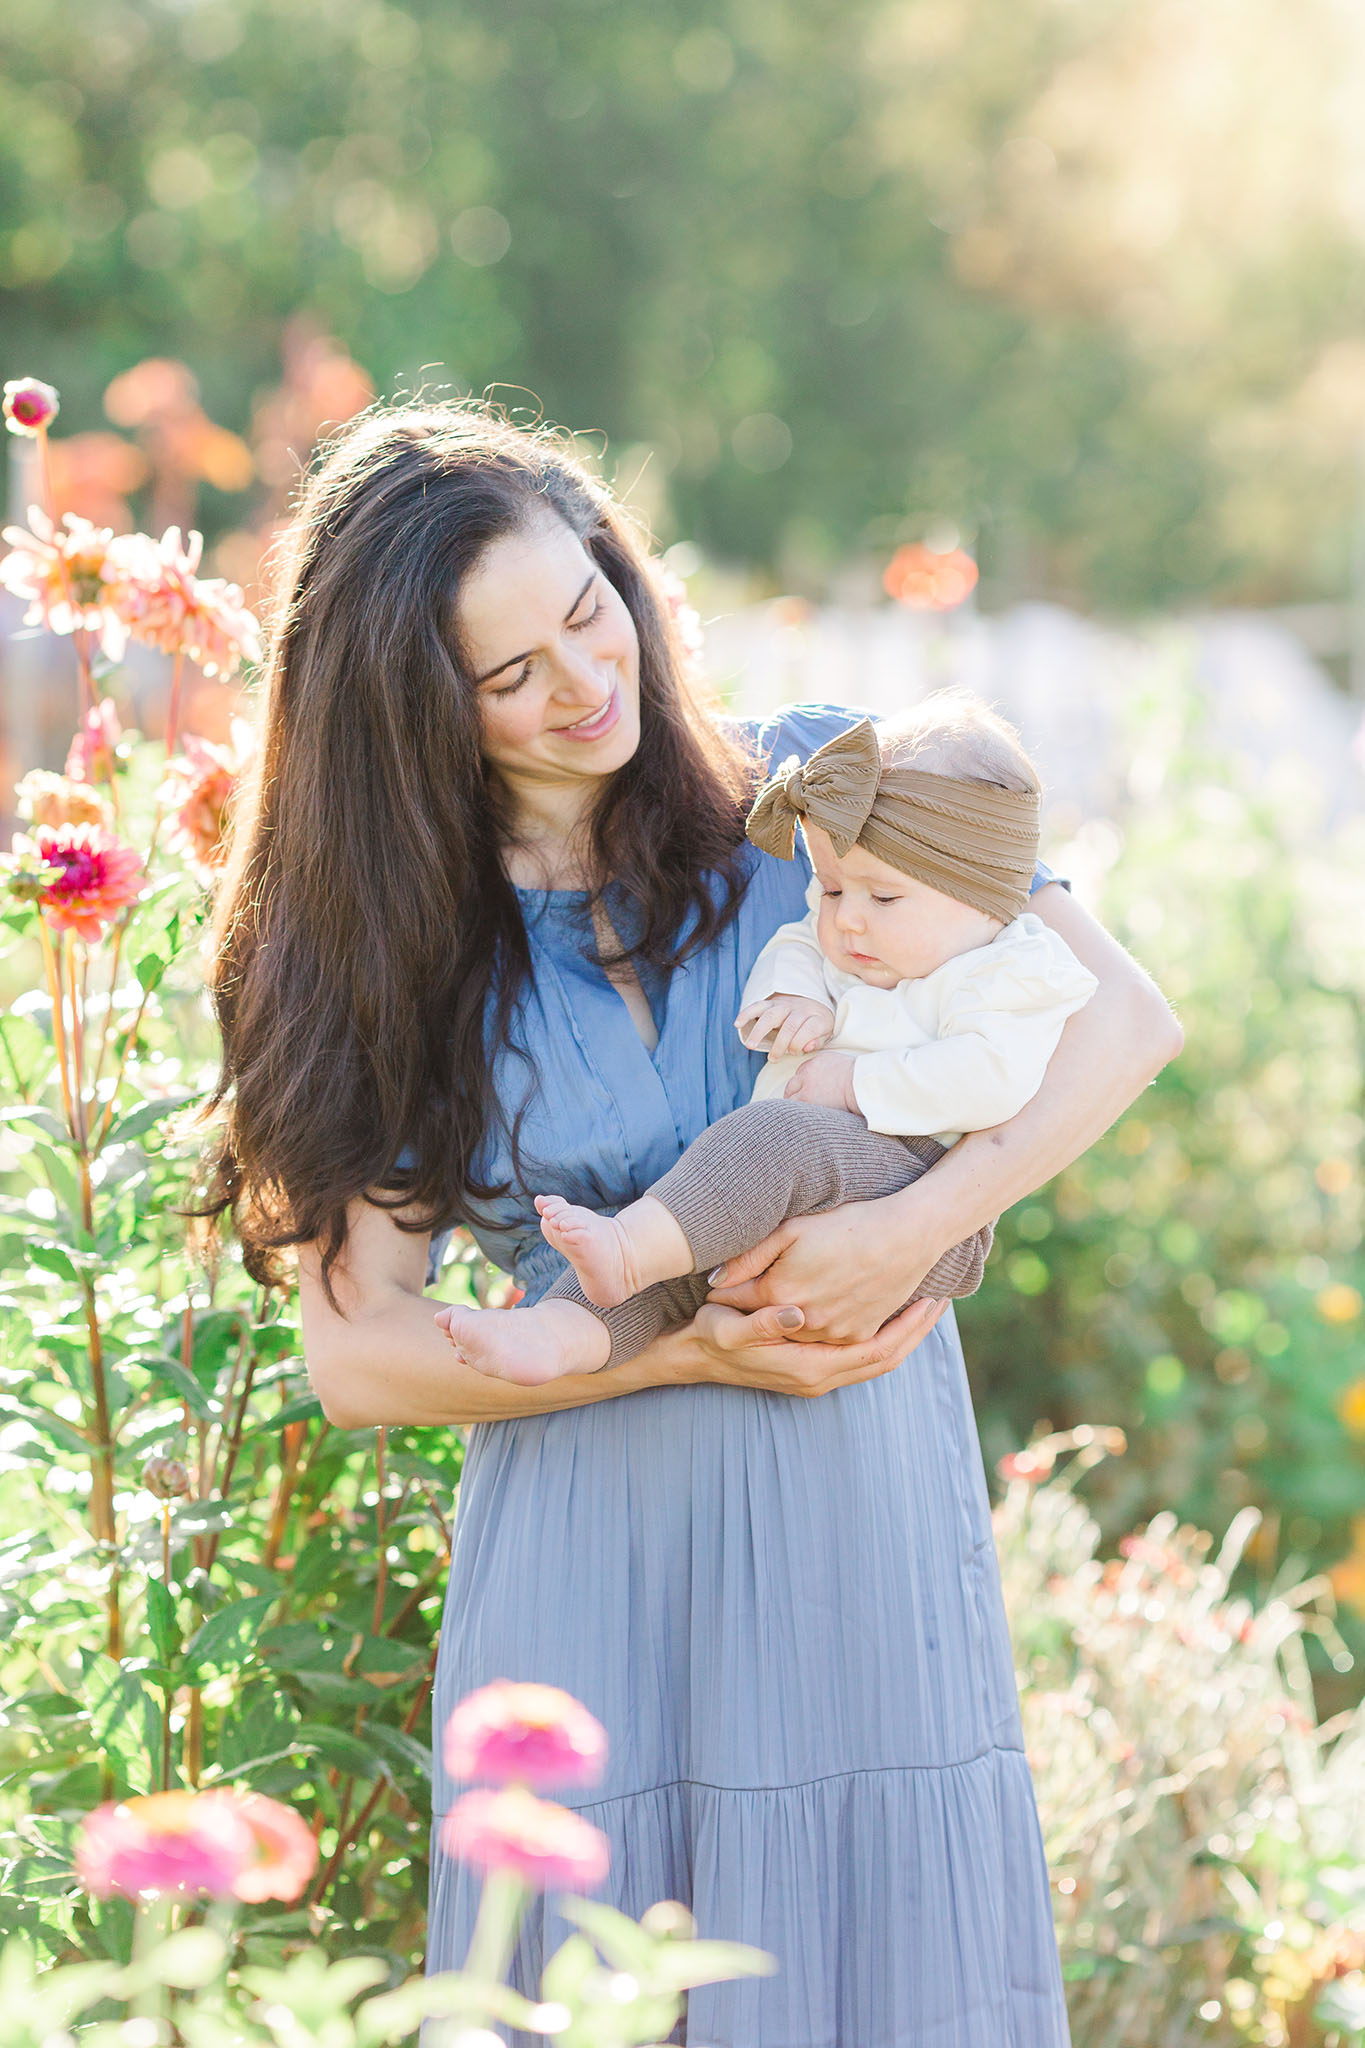 mom holding baby in a flower field by photographer in vancouver wa samantha shannon